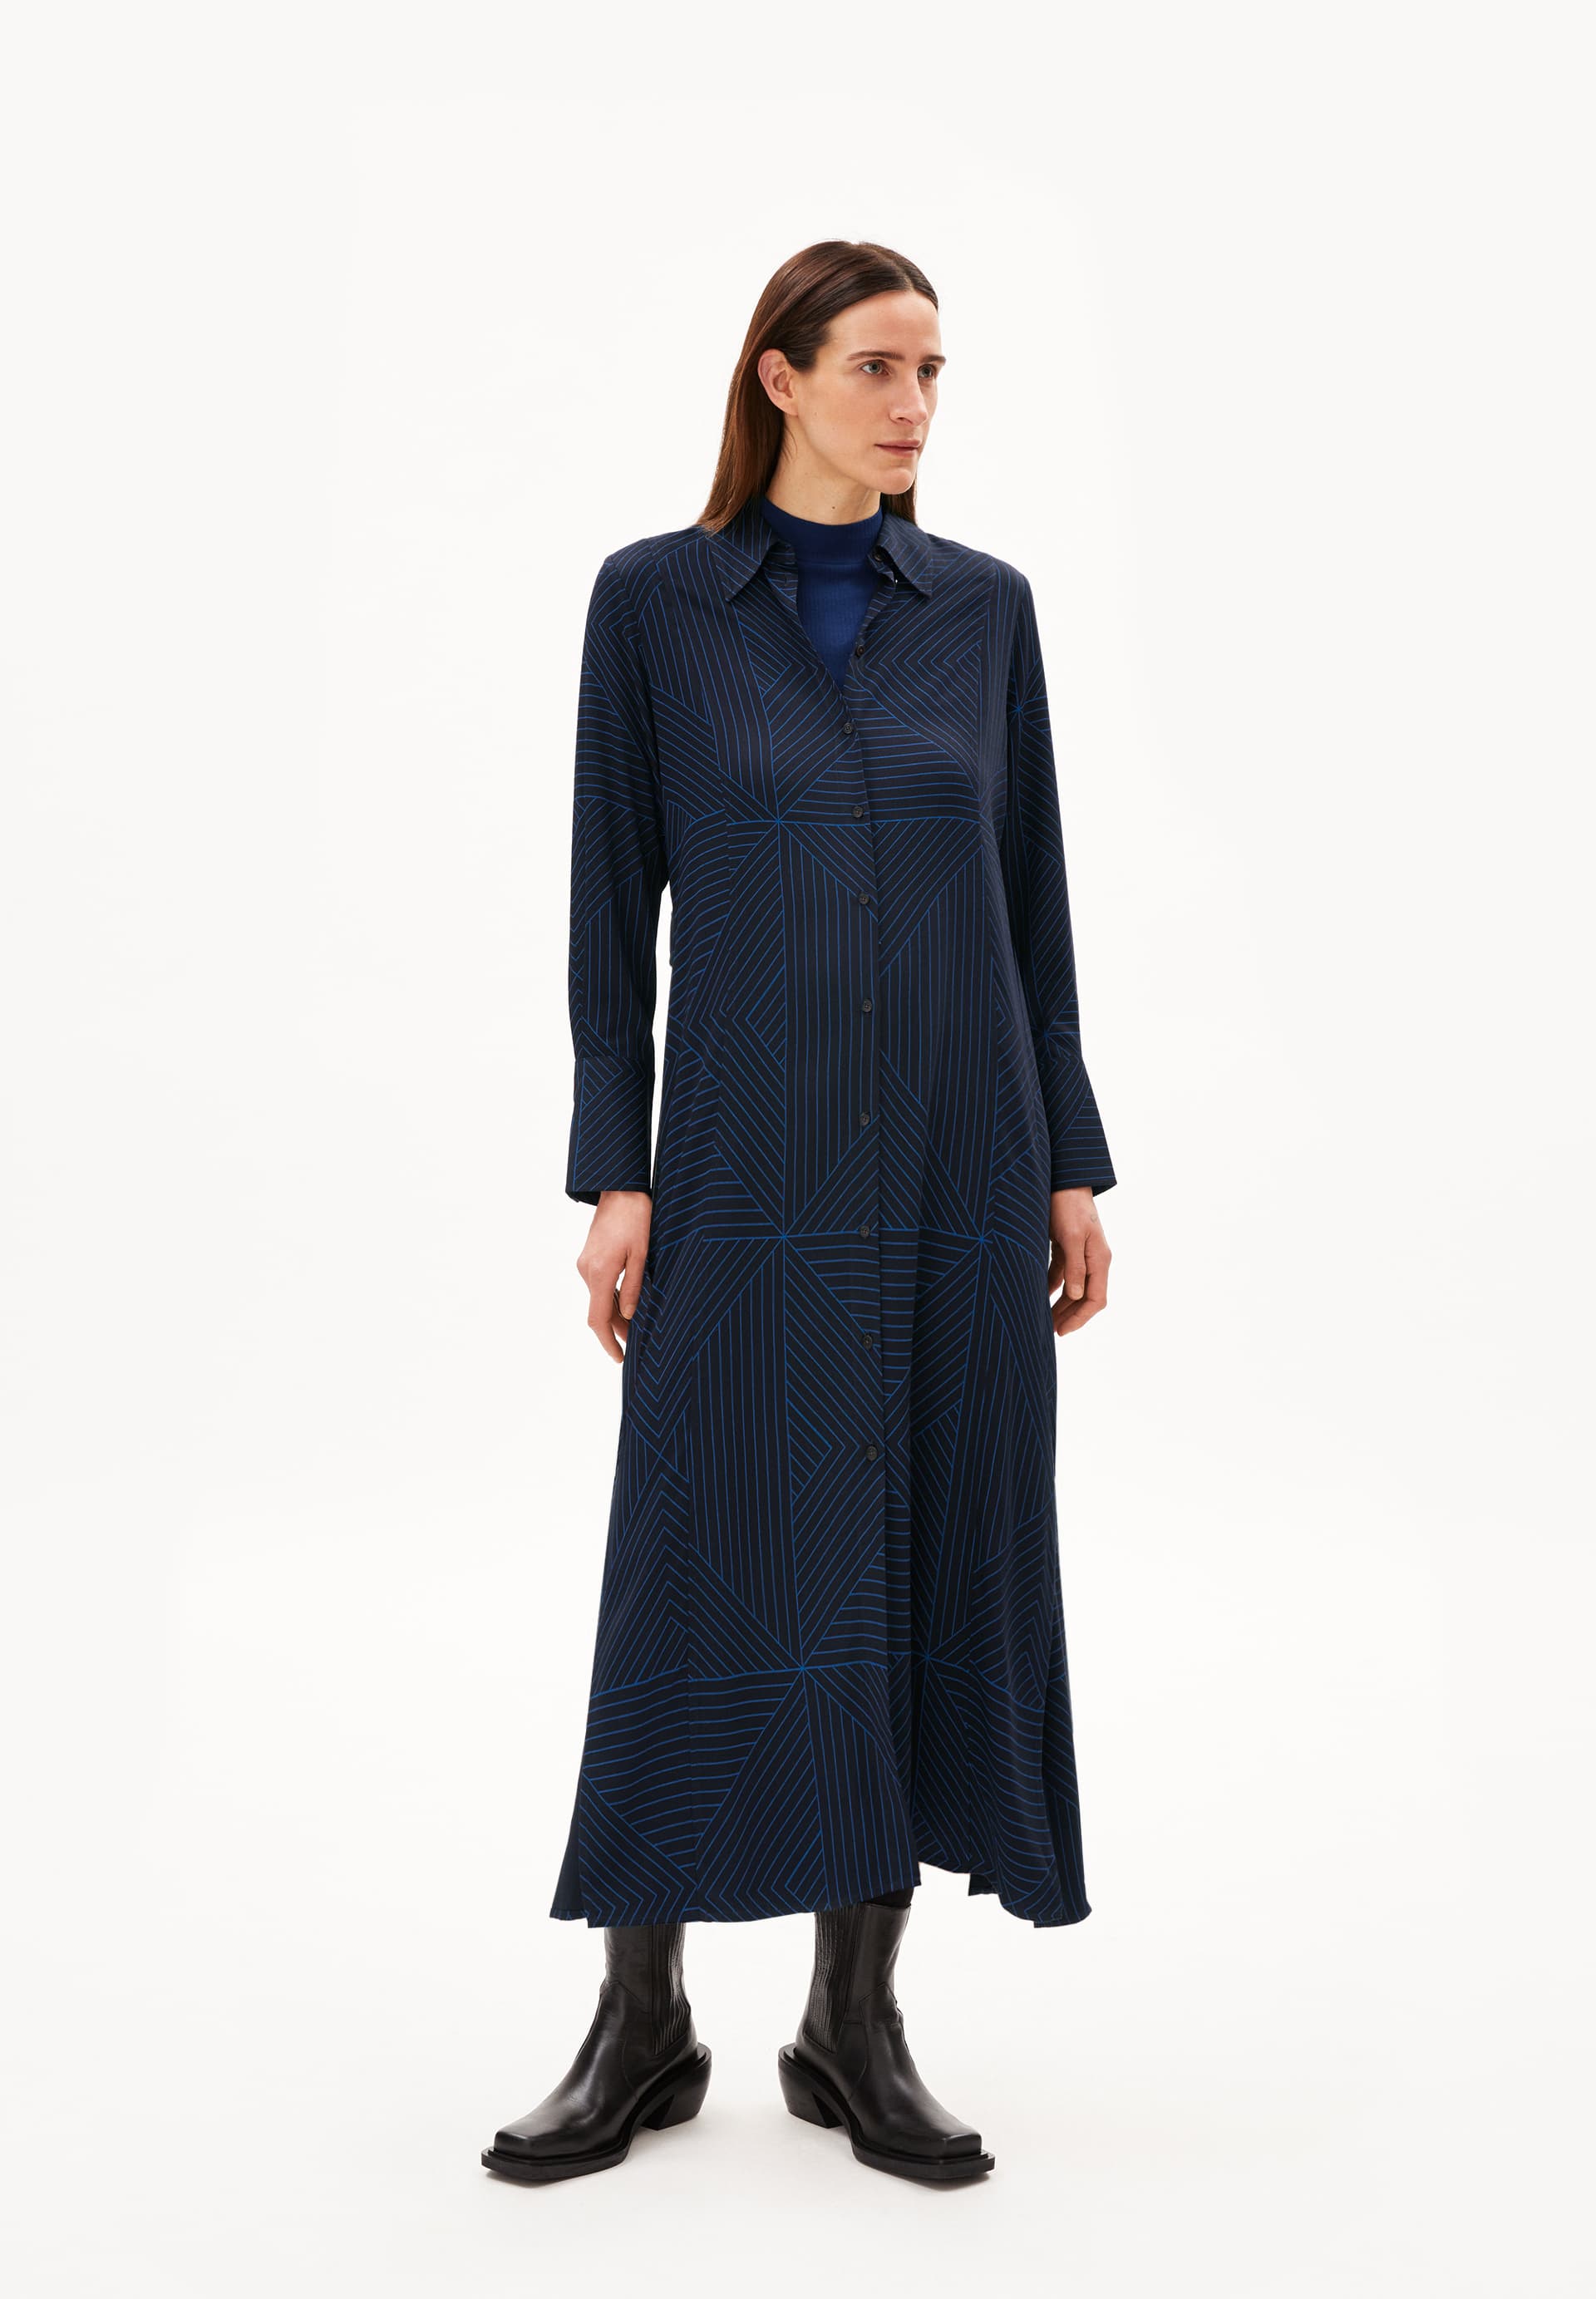 DORISAA GRAPHIC LINES Woven Dress Relaxed Fit made of LENZING™ ECOVERO™ Viscose